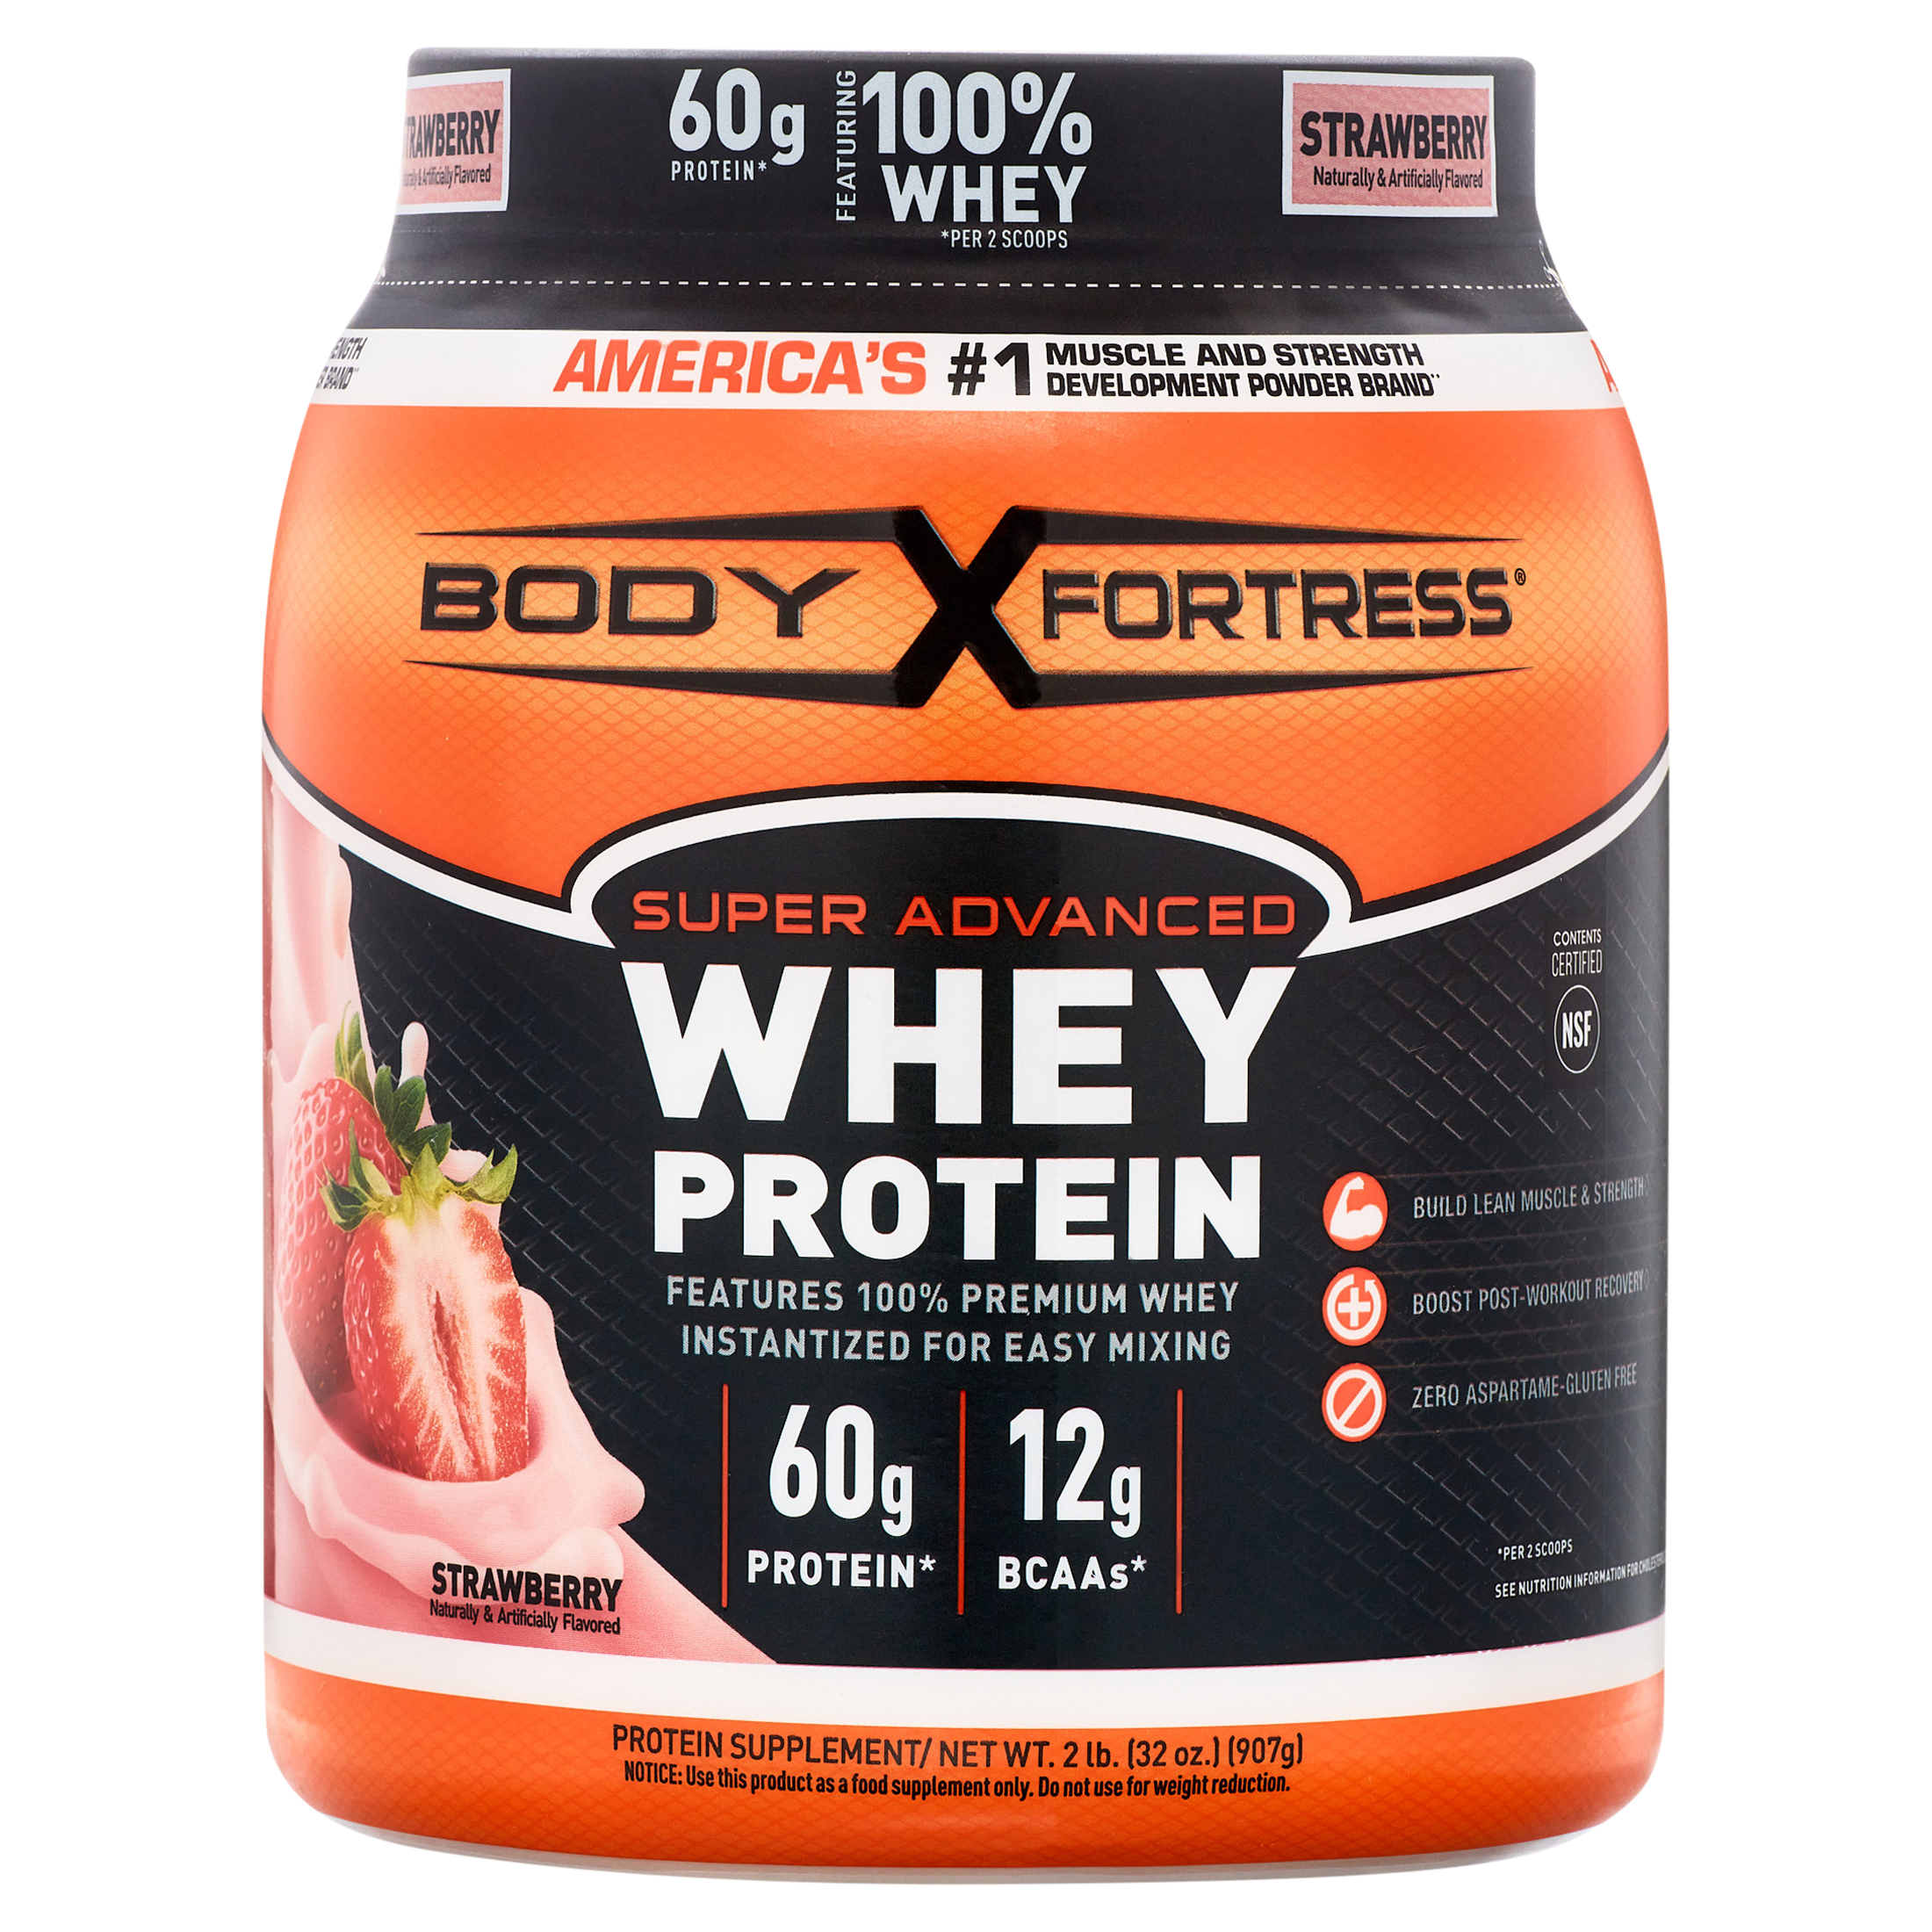 Body Fortress Whey Protein Powder, Strawberry Flavored, Gluten Free, 60 G Protein Per Serving, 2 Lbs - image 1 of 8